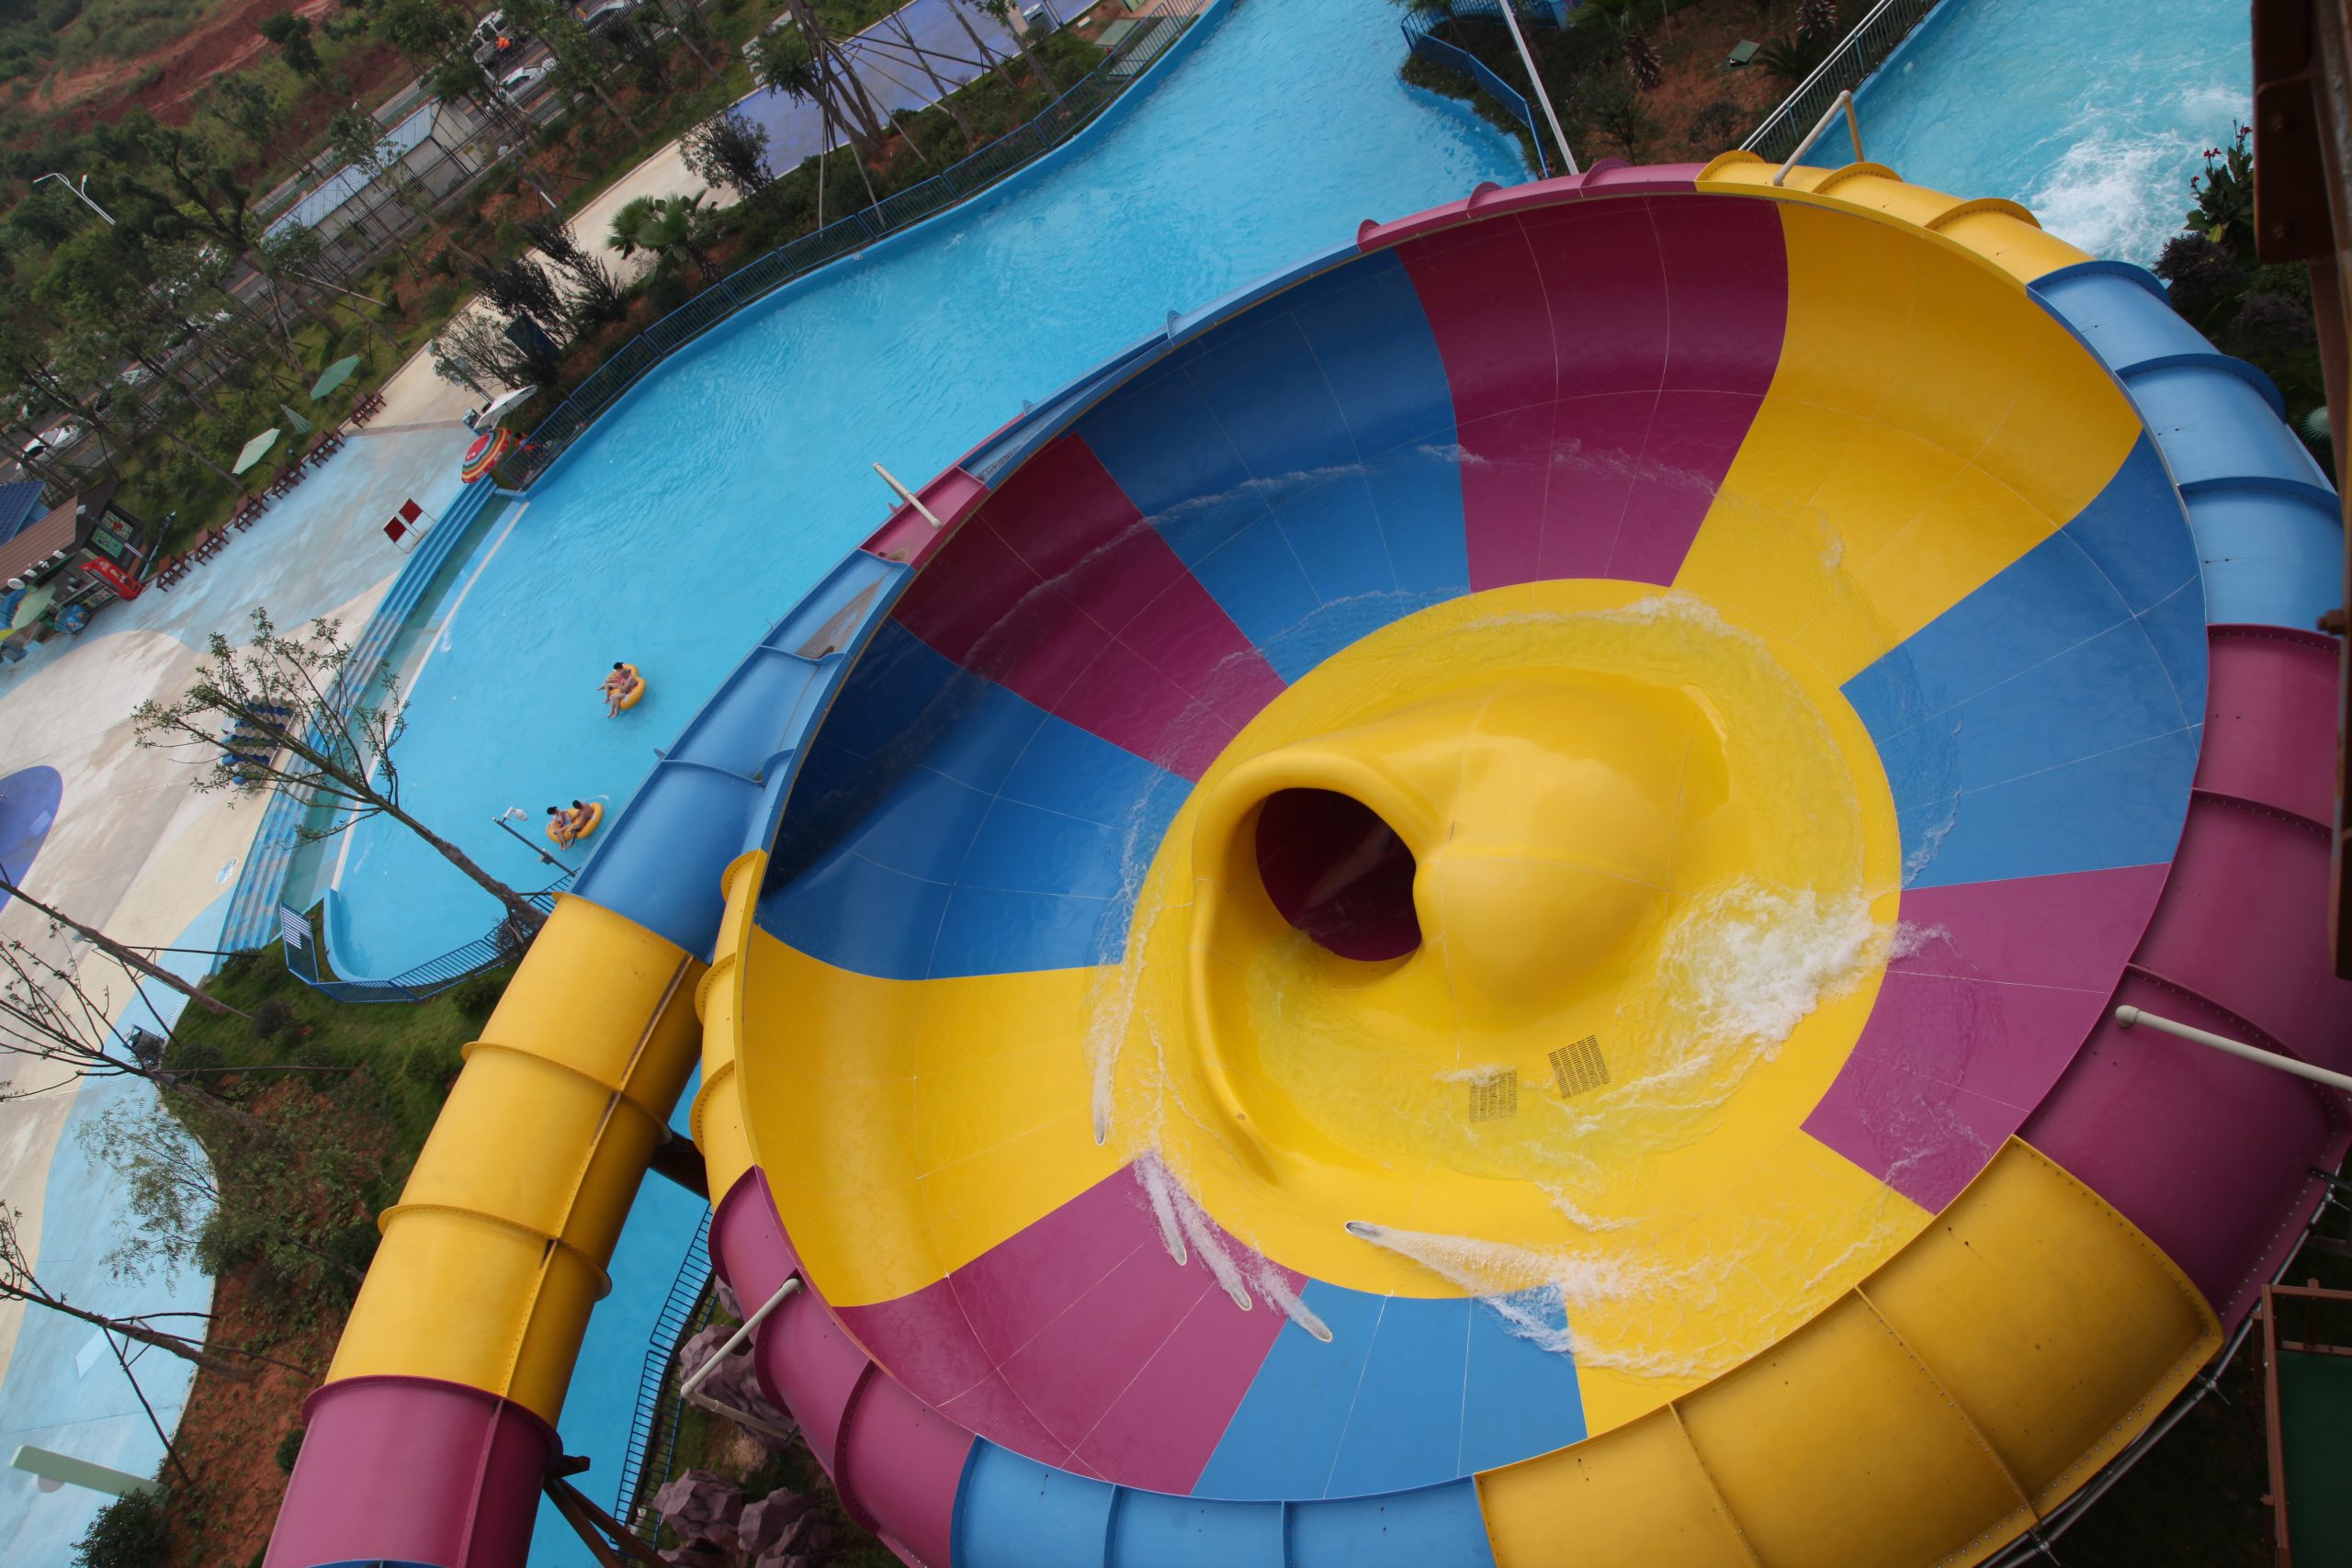 Challenge your courage and endurance on these thrilling water slides